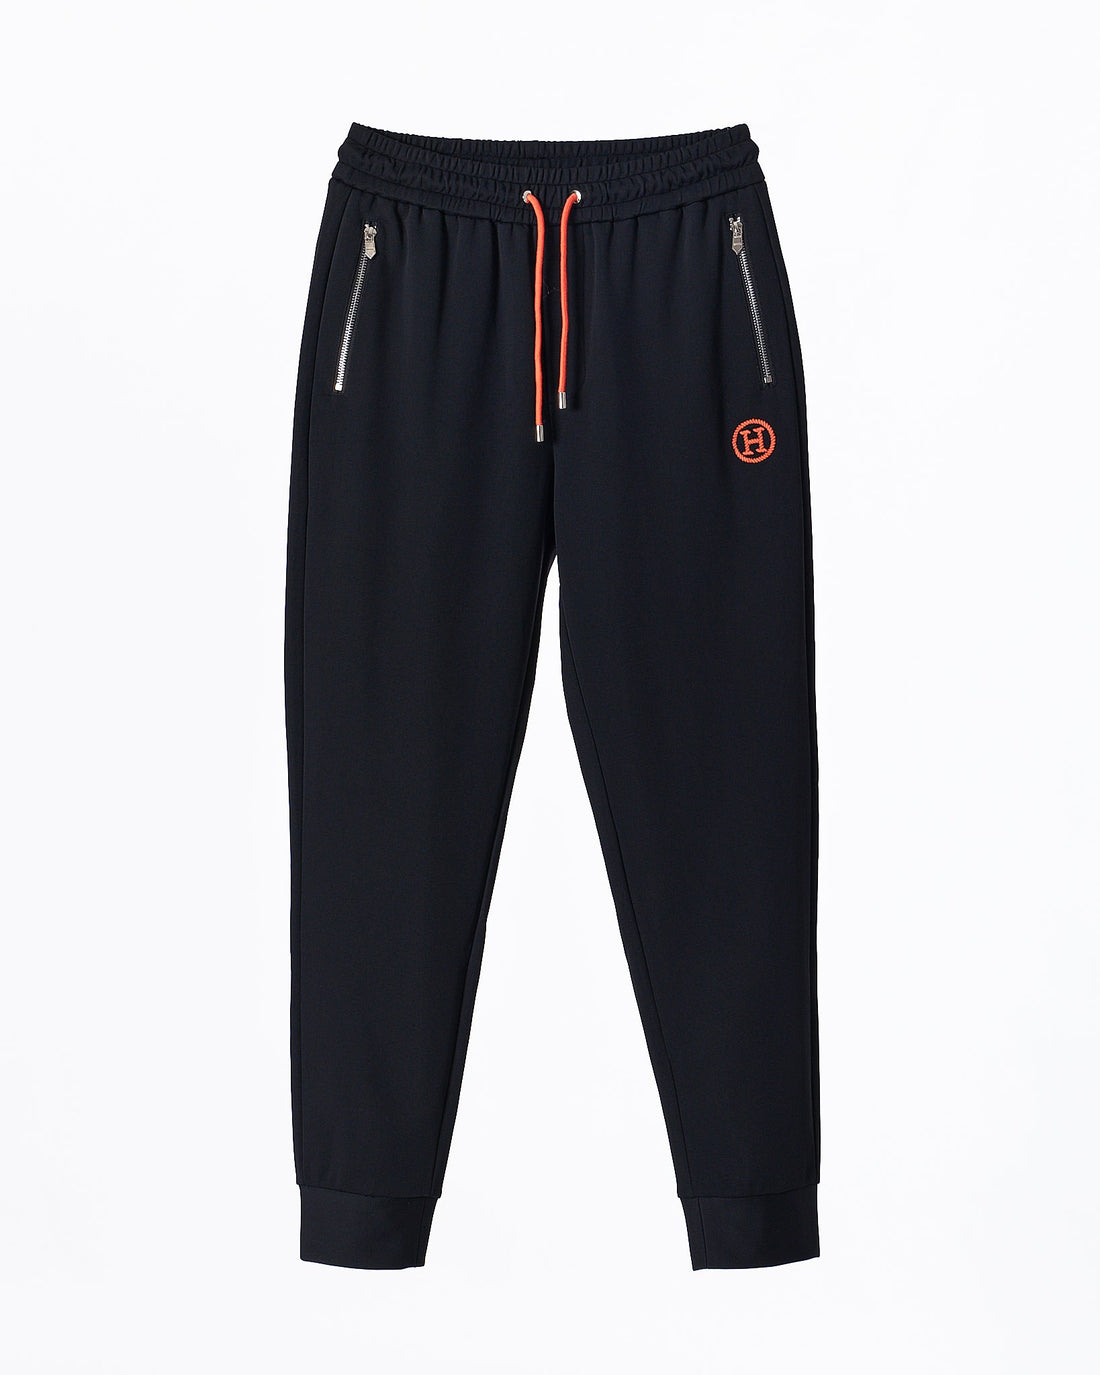 MOI OUTFIT-H Logo Embroidered Men Joggers 79.90